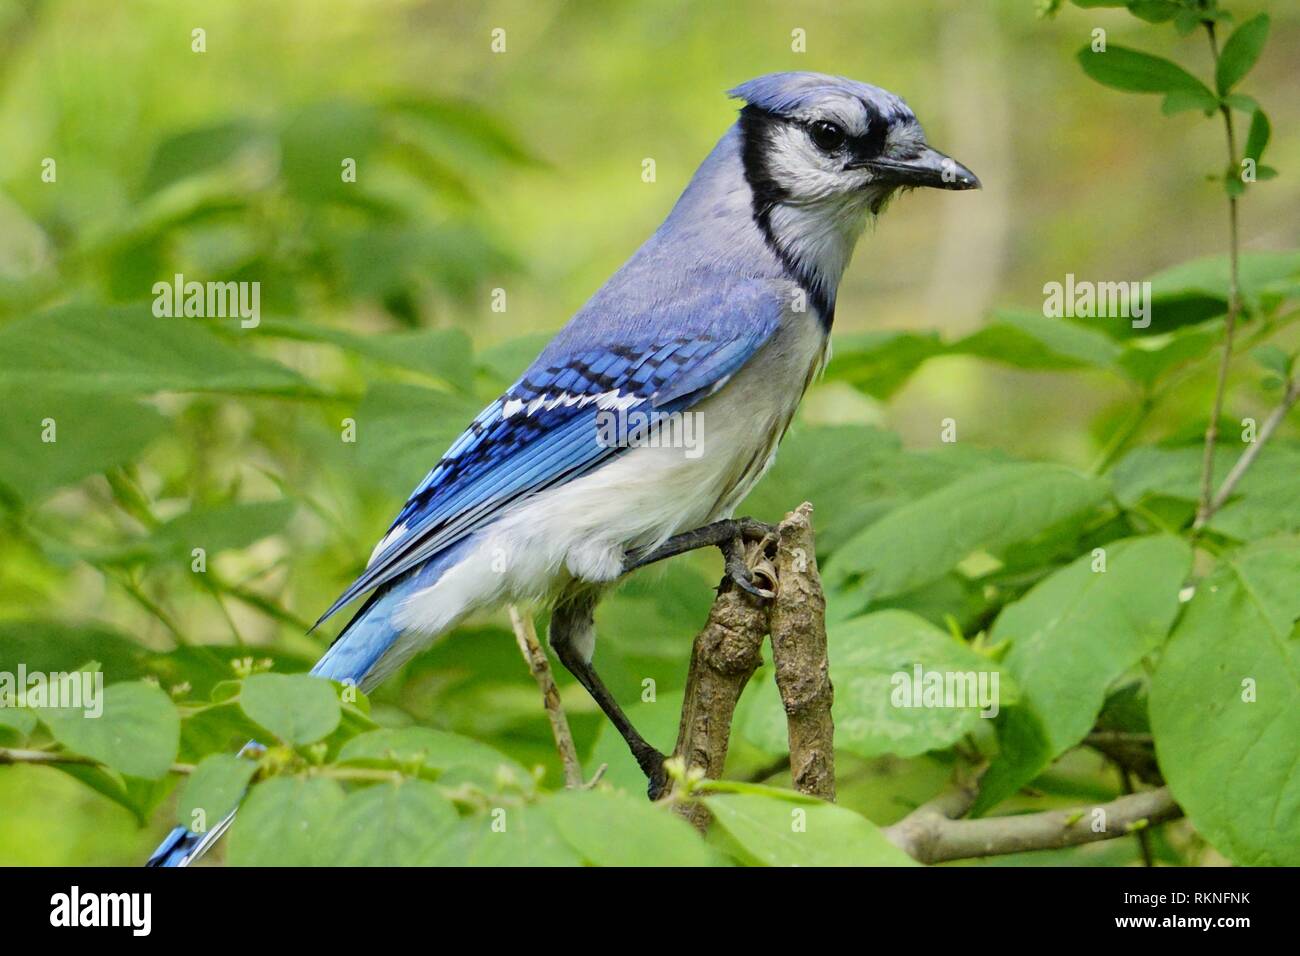 A bluejay, Cyanocitta cristata, looking around from a branch, Pennsylvania, USA. Stock Photo